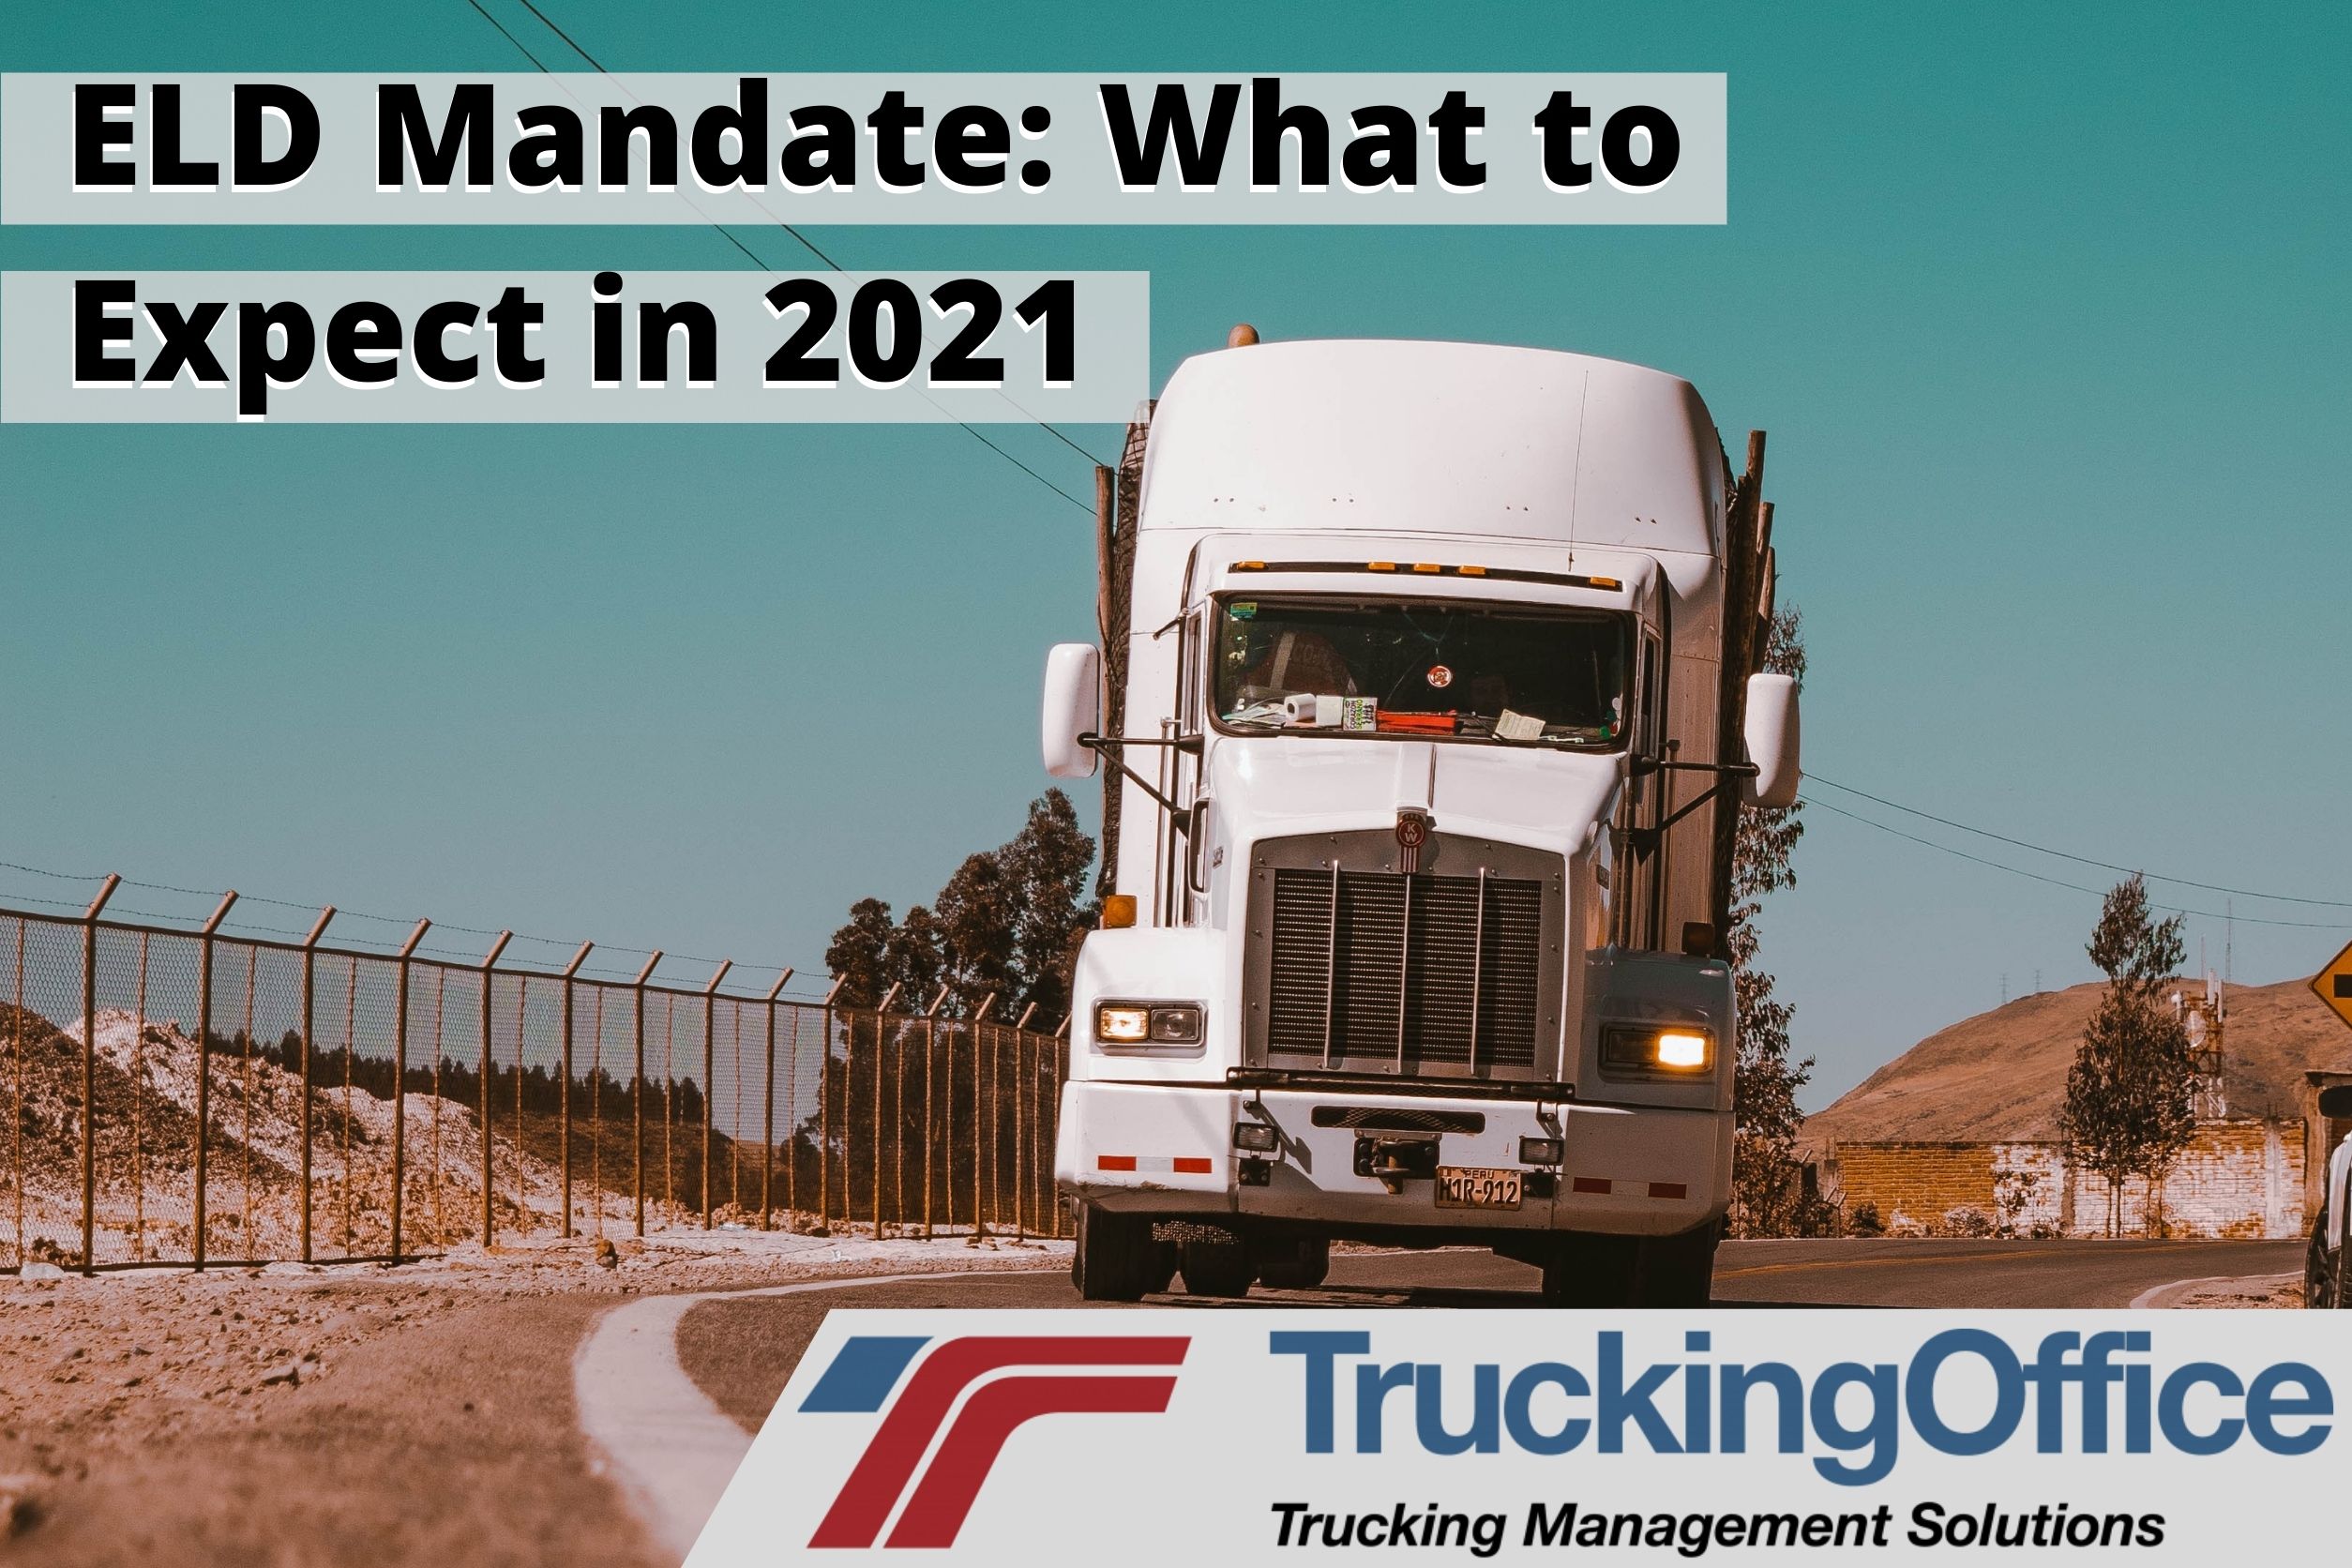 ELD Mandate: What to Expect in 2021